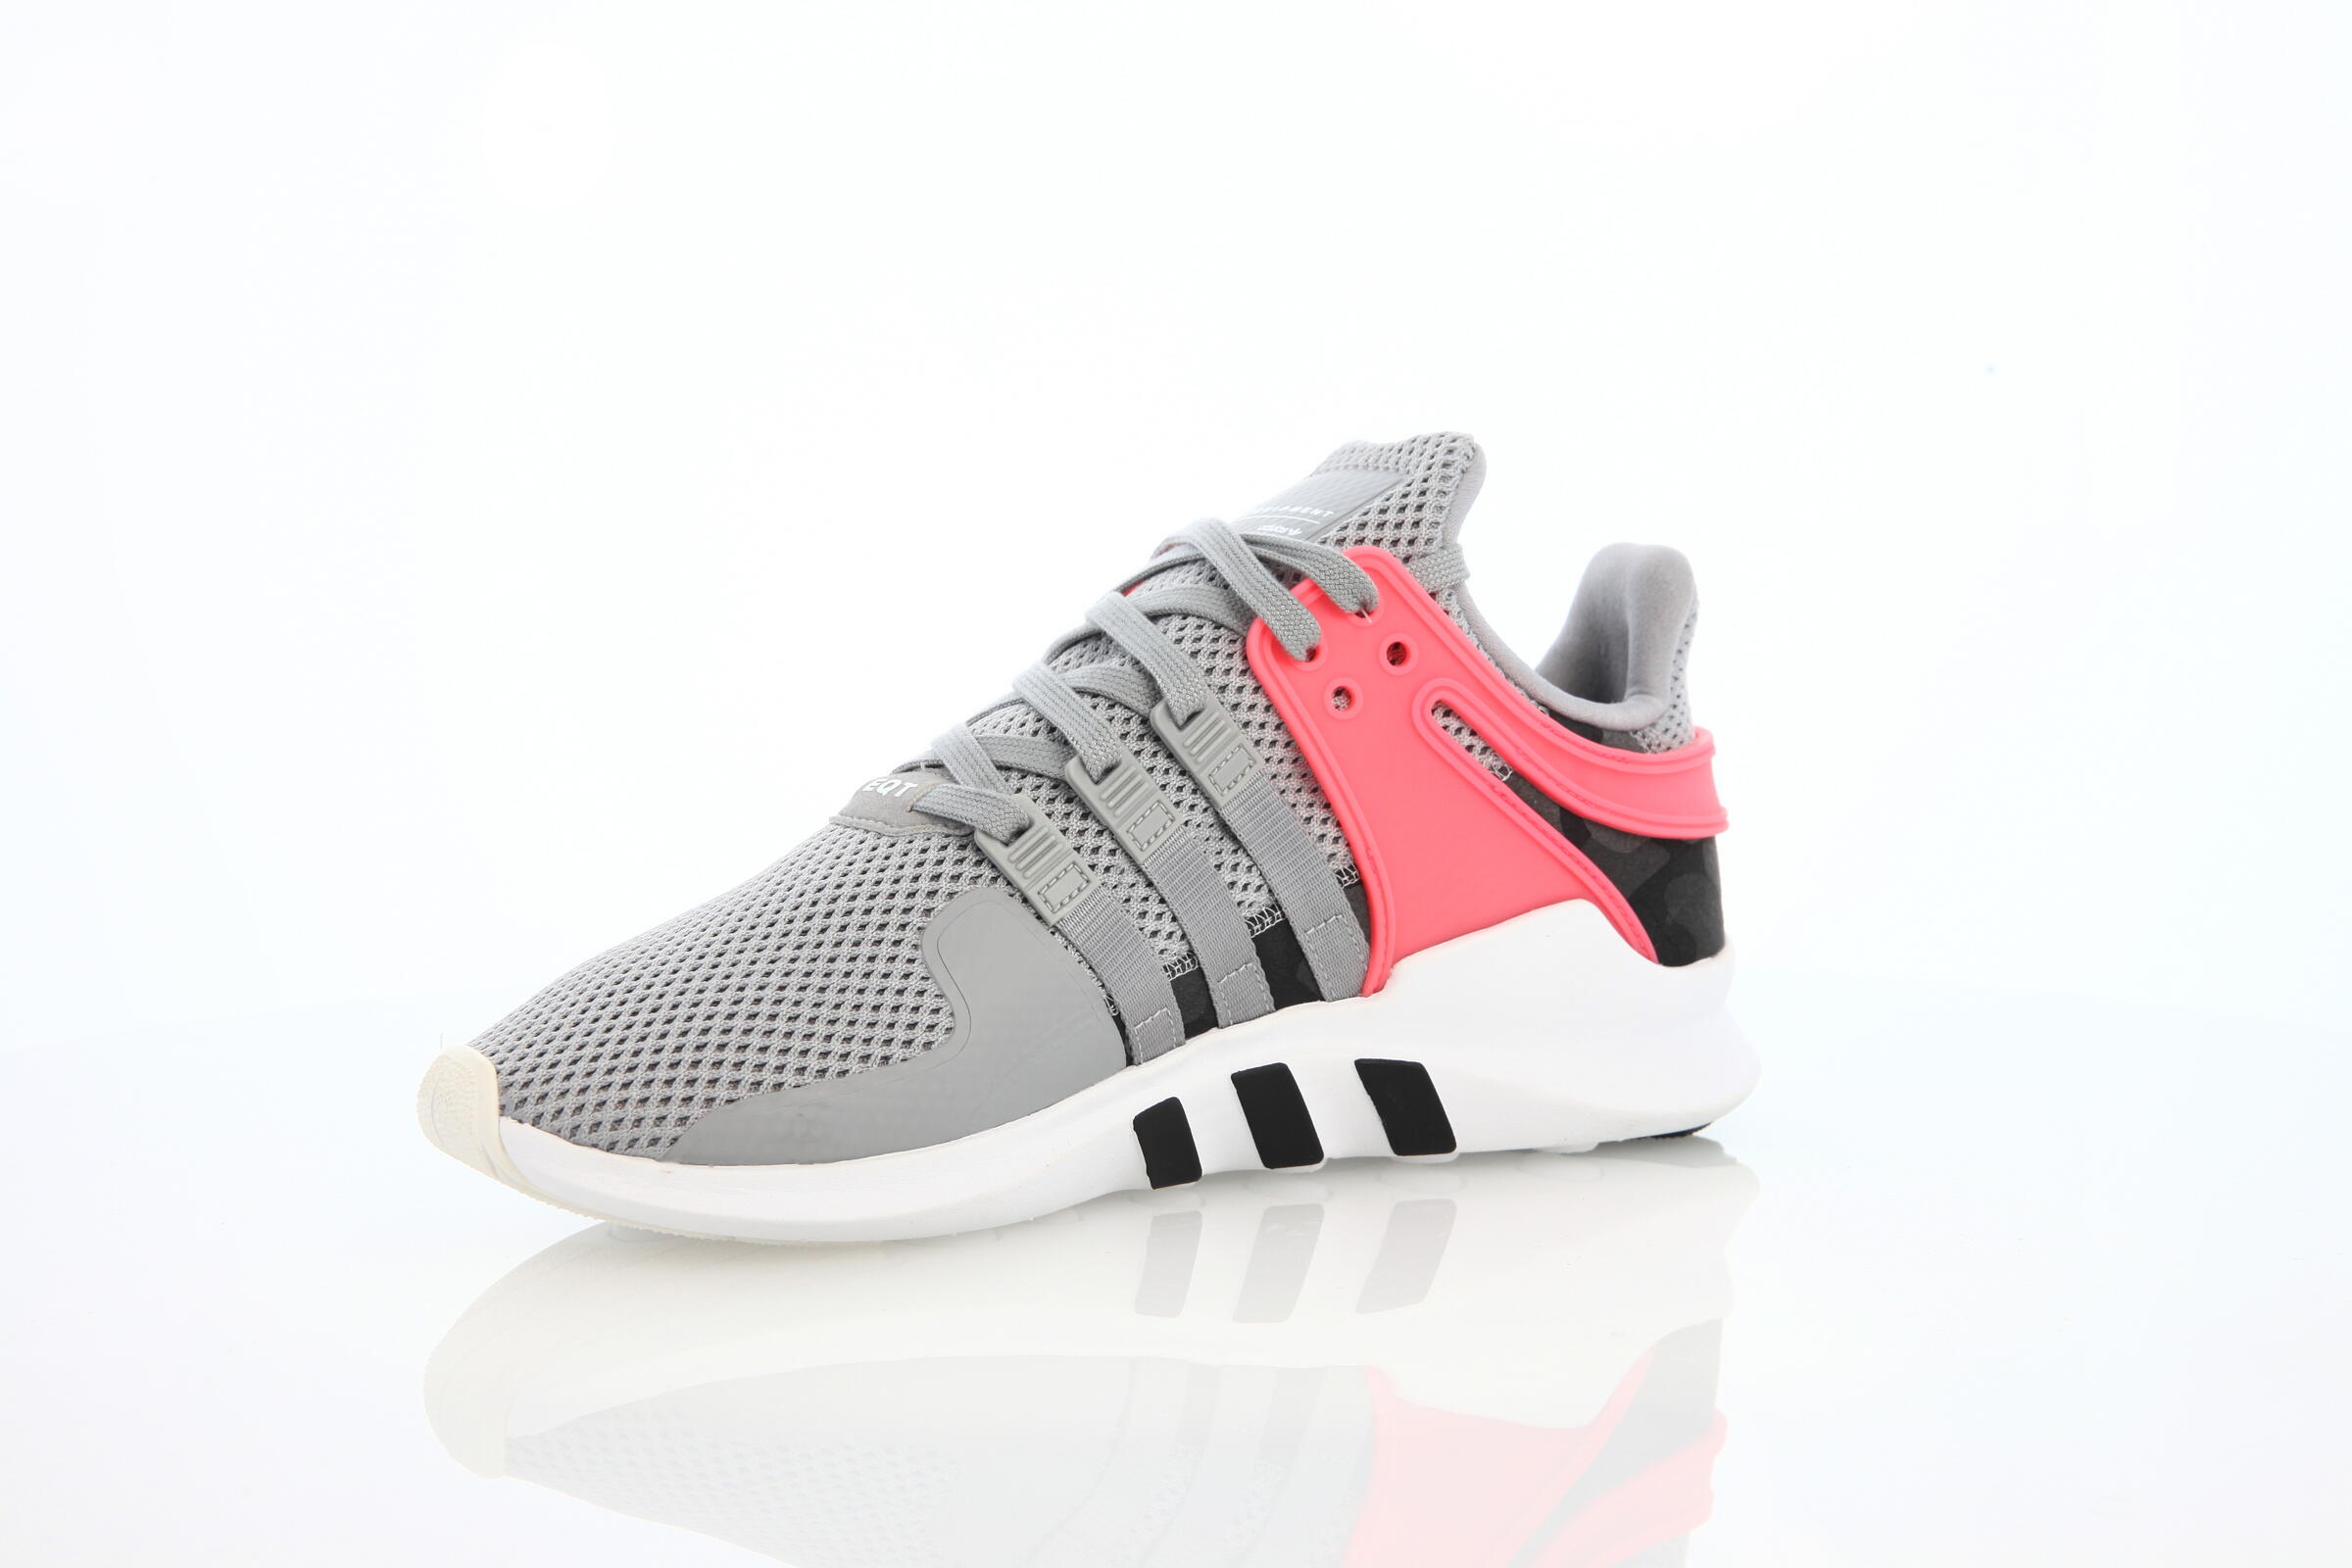 adidas Performance EQT Support Adv "Solid Grey"